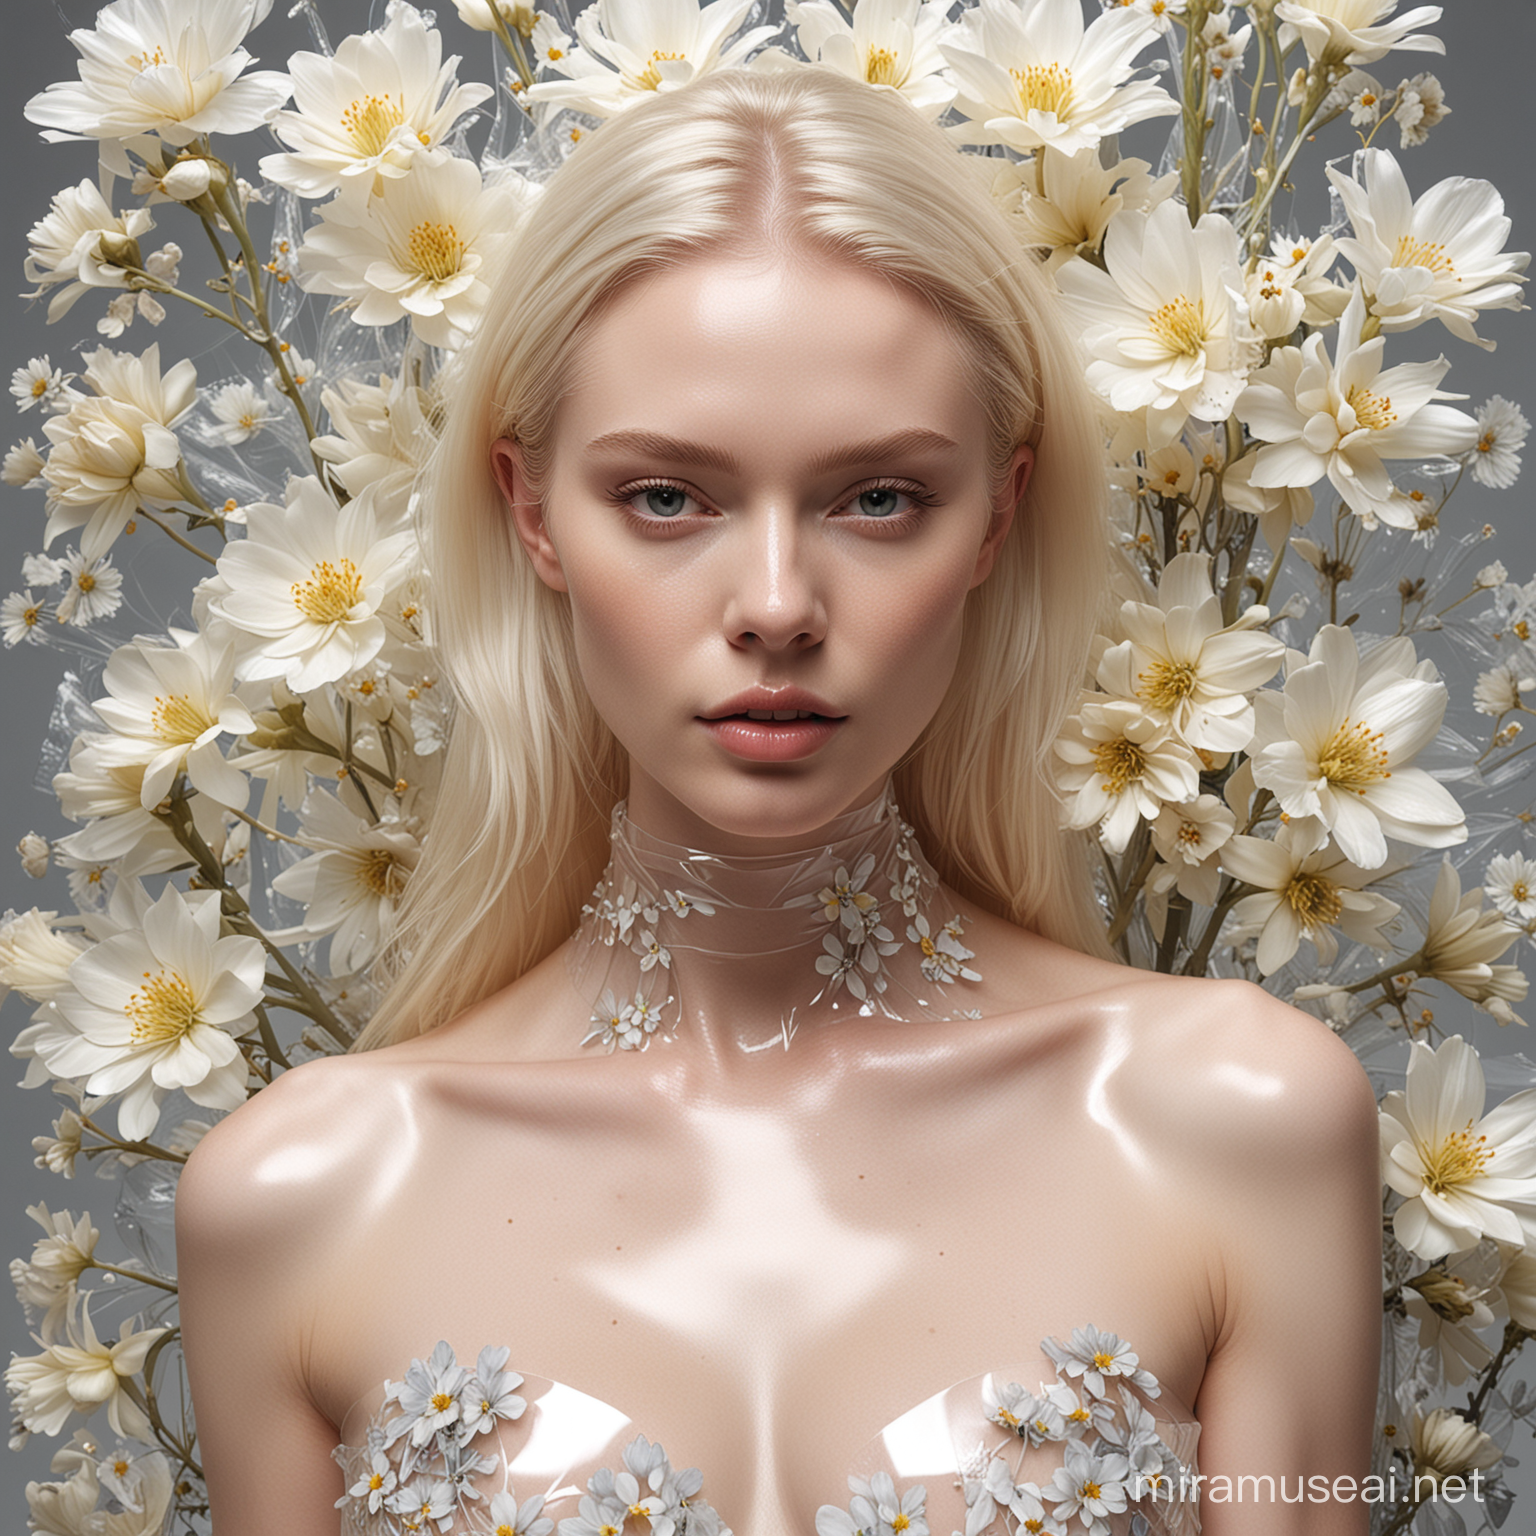  audrey hepborn,Hyper-realistic photo of a professional model with pale skin posing for a fashion photoshoot. She is entirely wrapped in transparent film, with tons of flowers under the film covering her skin. The shot is a mid-body shot.